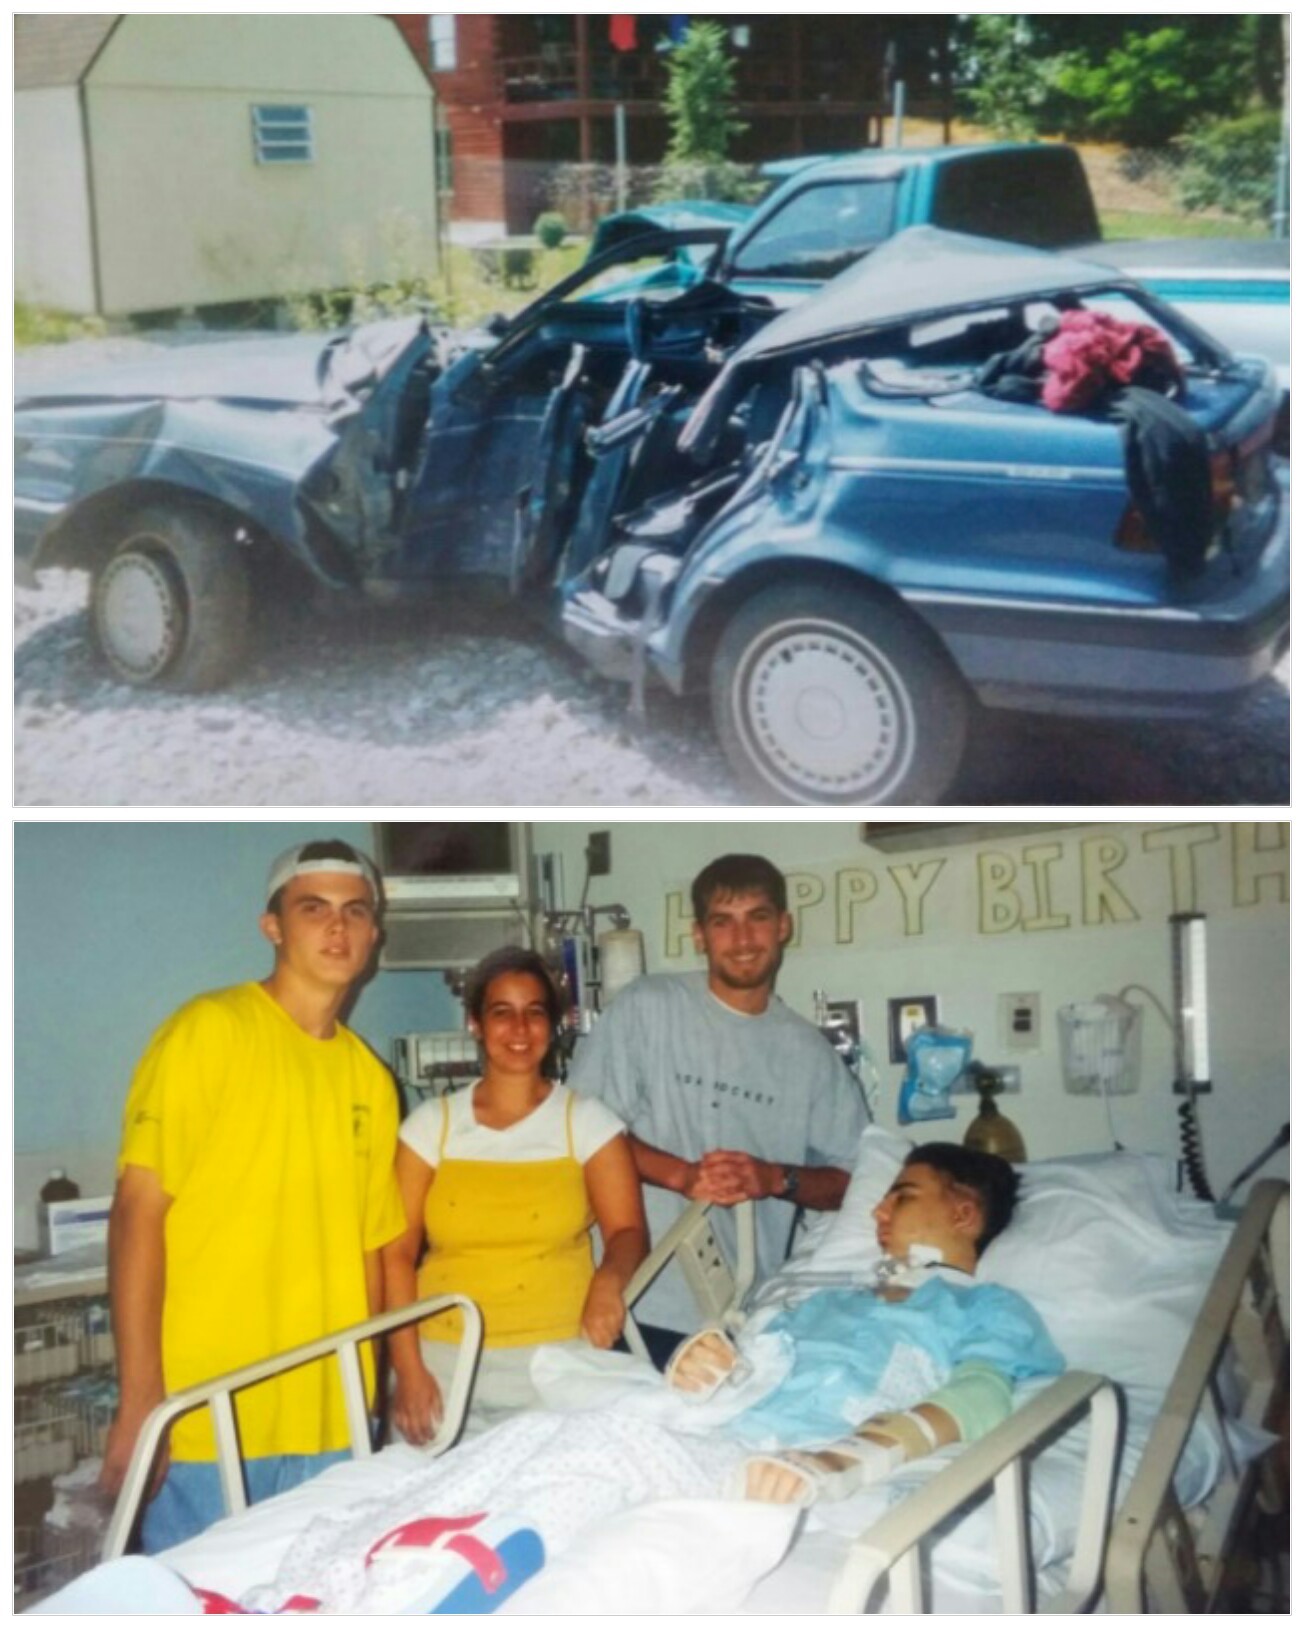 Jonathan's wrecked car and friends visiting him in the hospital